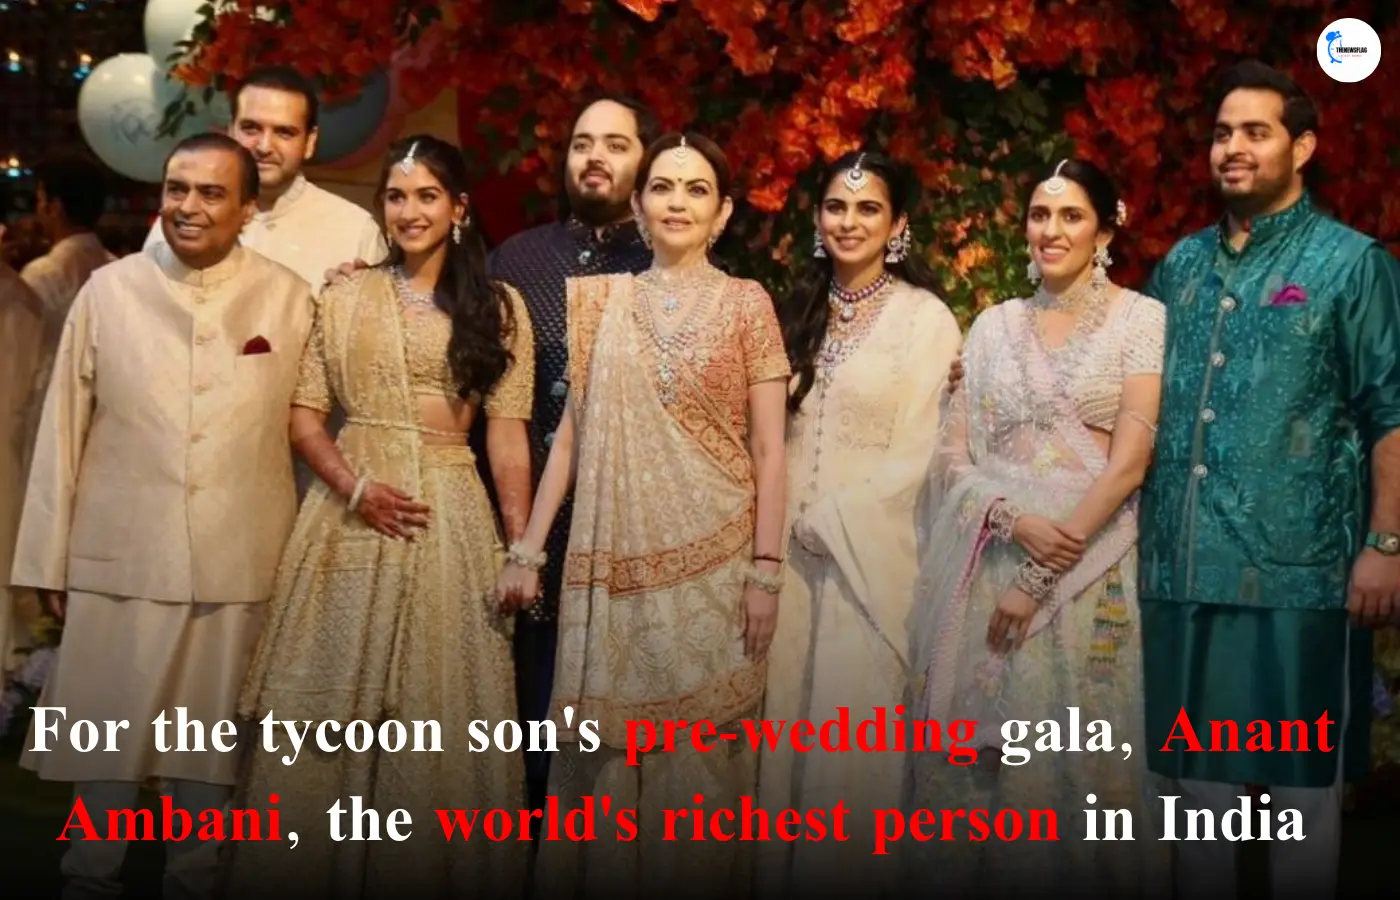 For the tycoon son's pre-wedding gala, Anant Ambani, the world's richest person in India